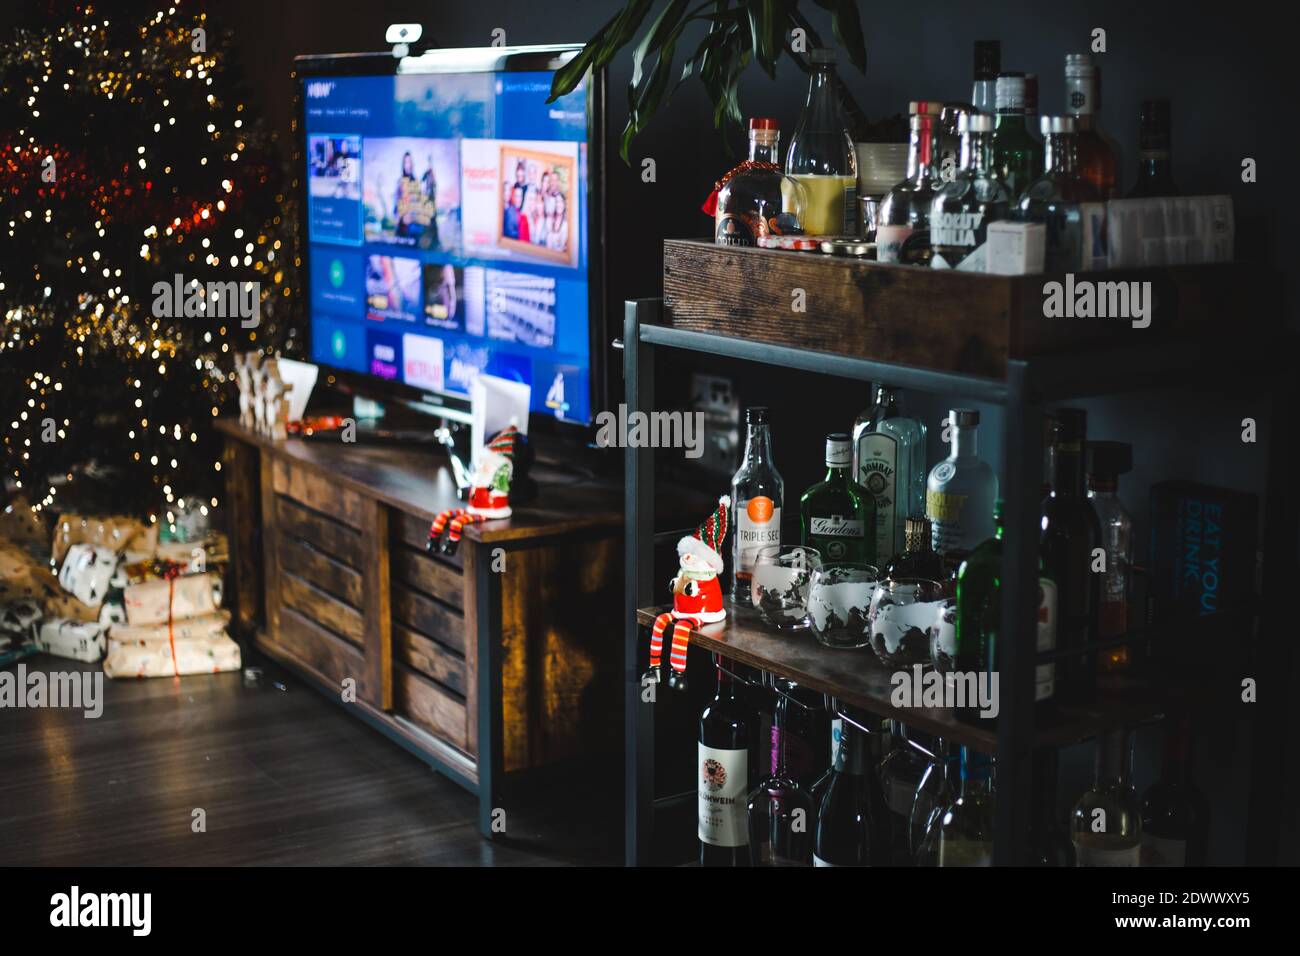 Santa toy sits on the shelf of a drinks trolley in a cozy, festive living room of a dark grey apartment ready for Christmas Stock Photo